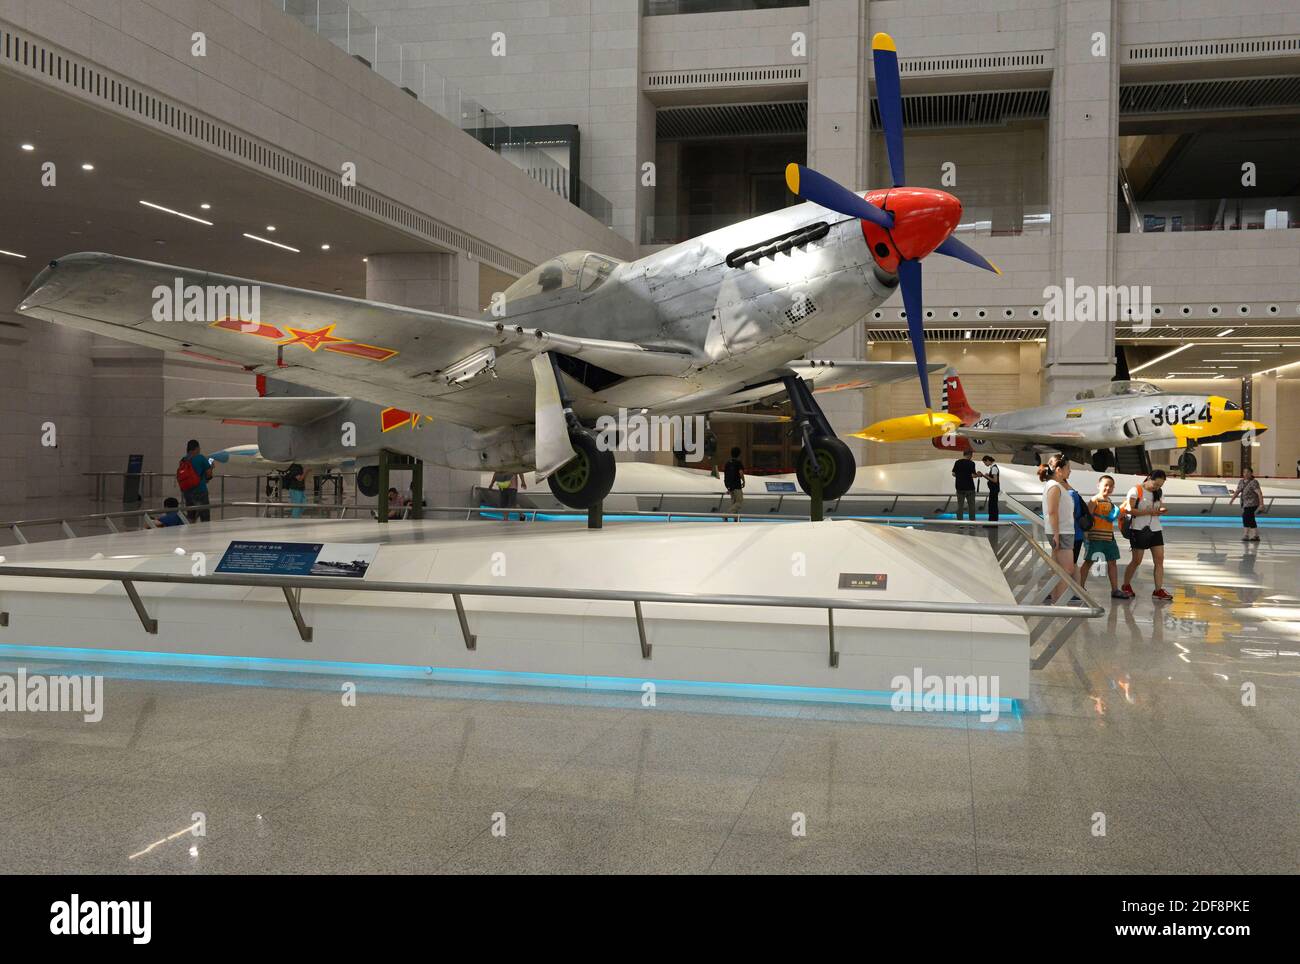 A US P-51 Mustang fighter aircraft in China airforce livery on display in the main hall at the National Military museum in Beijing, China Stock Photo